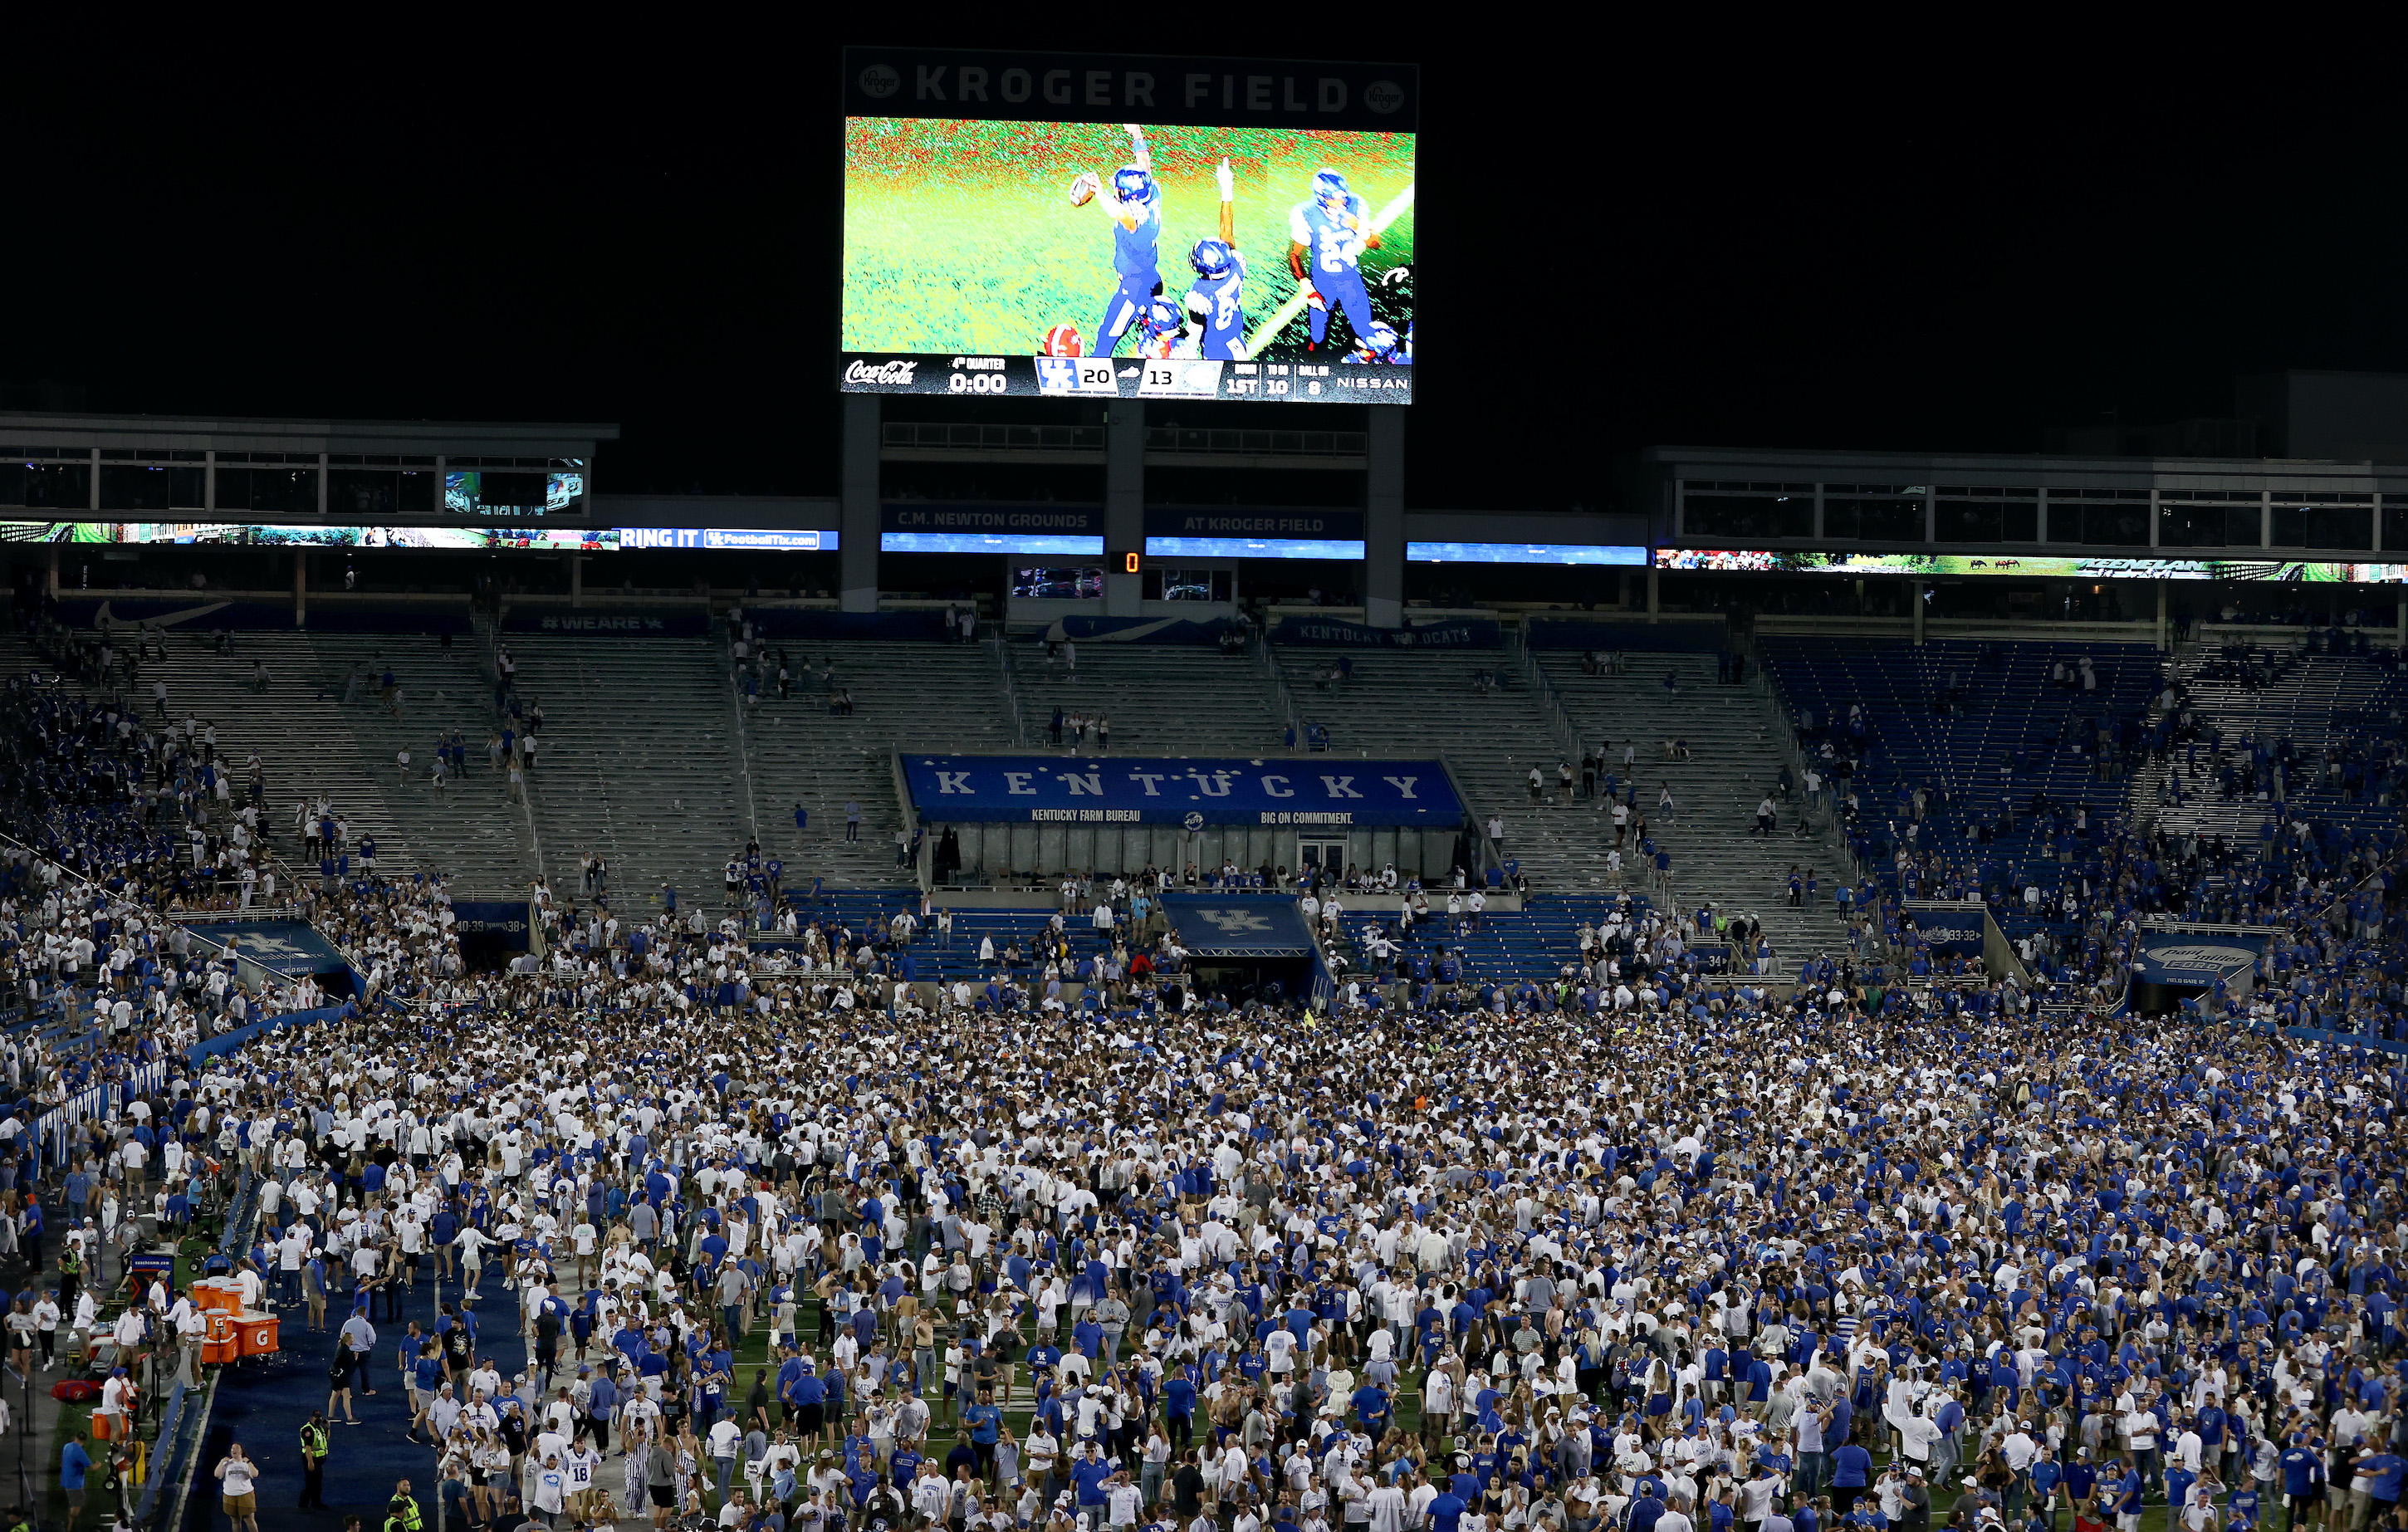 The Kentucky Wildcats fans celebrate on the field after the 20-13 win against the Florida Gators at Kroger Field on October 02, 2021 in Lexington, Kentucky.